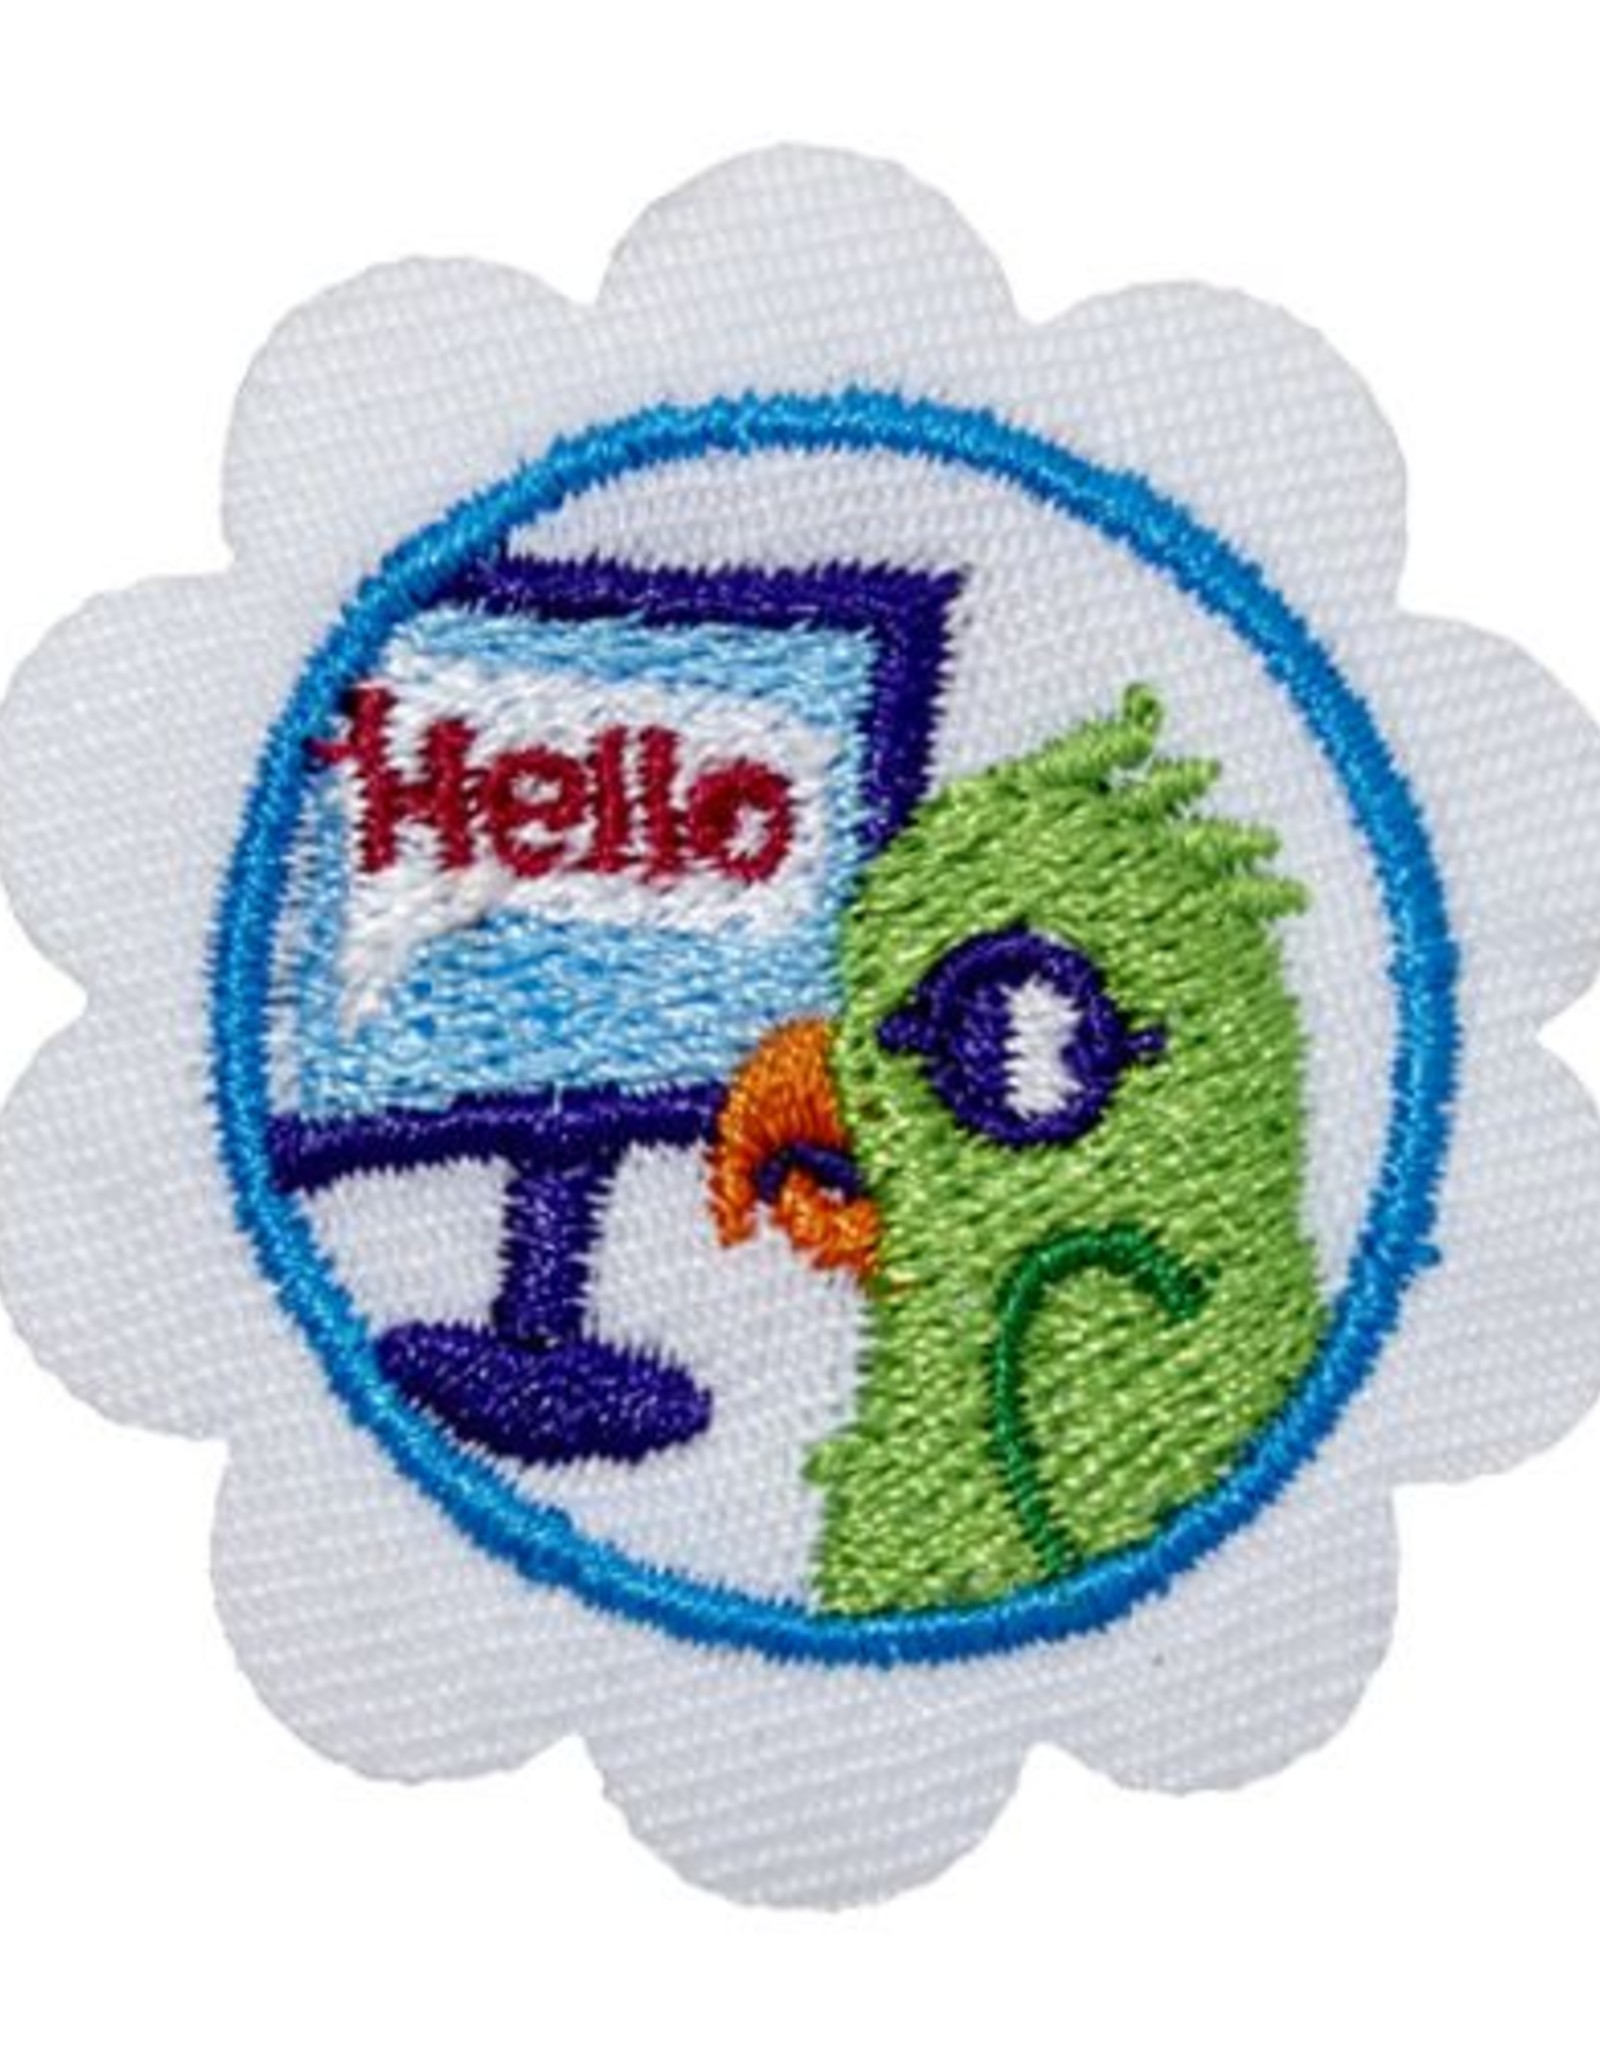 GIRL SCOUTS OF THE USA Daisy Cybersecurity Basics Badge